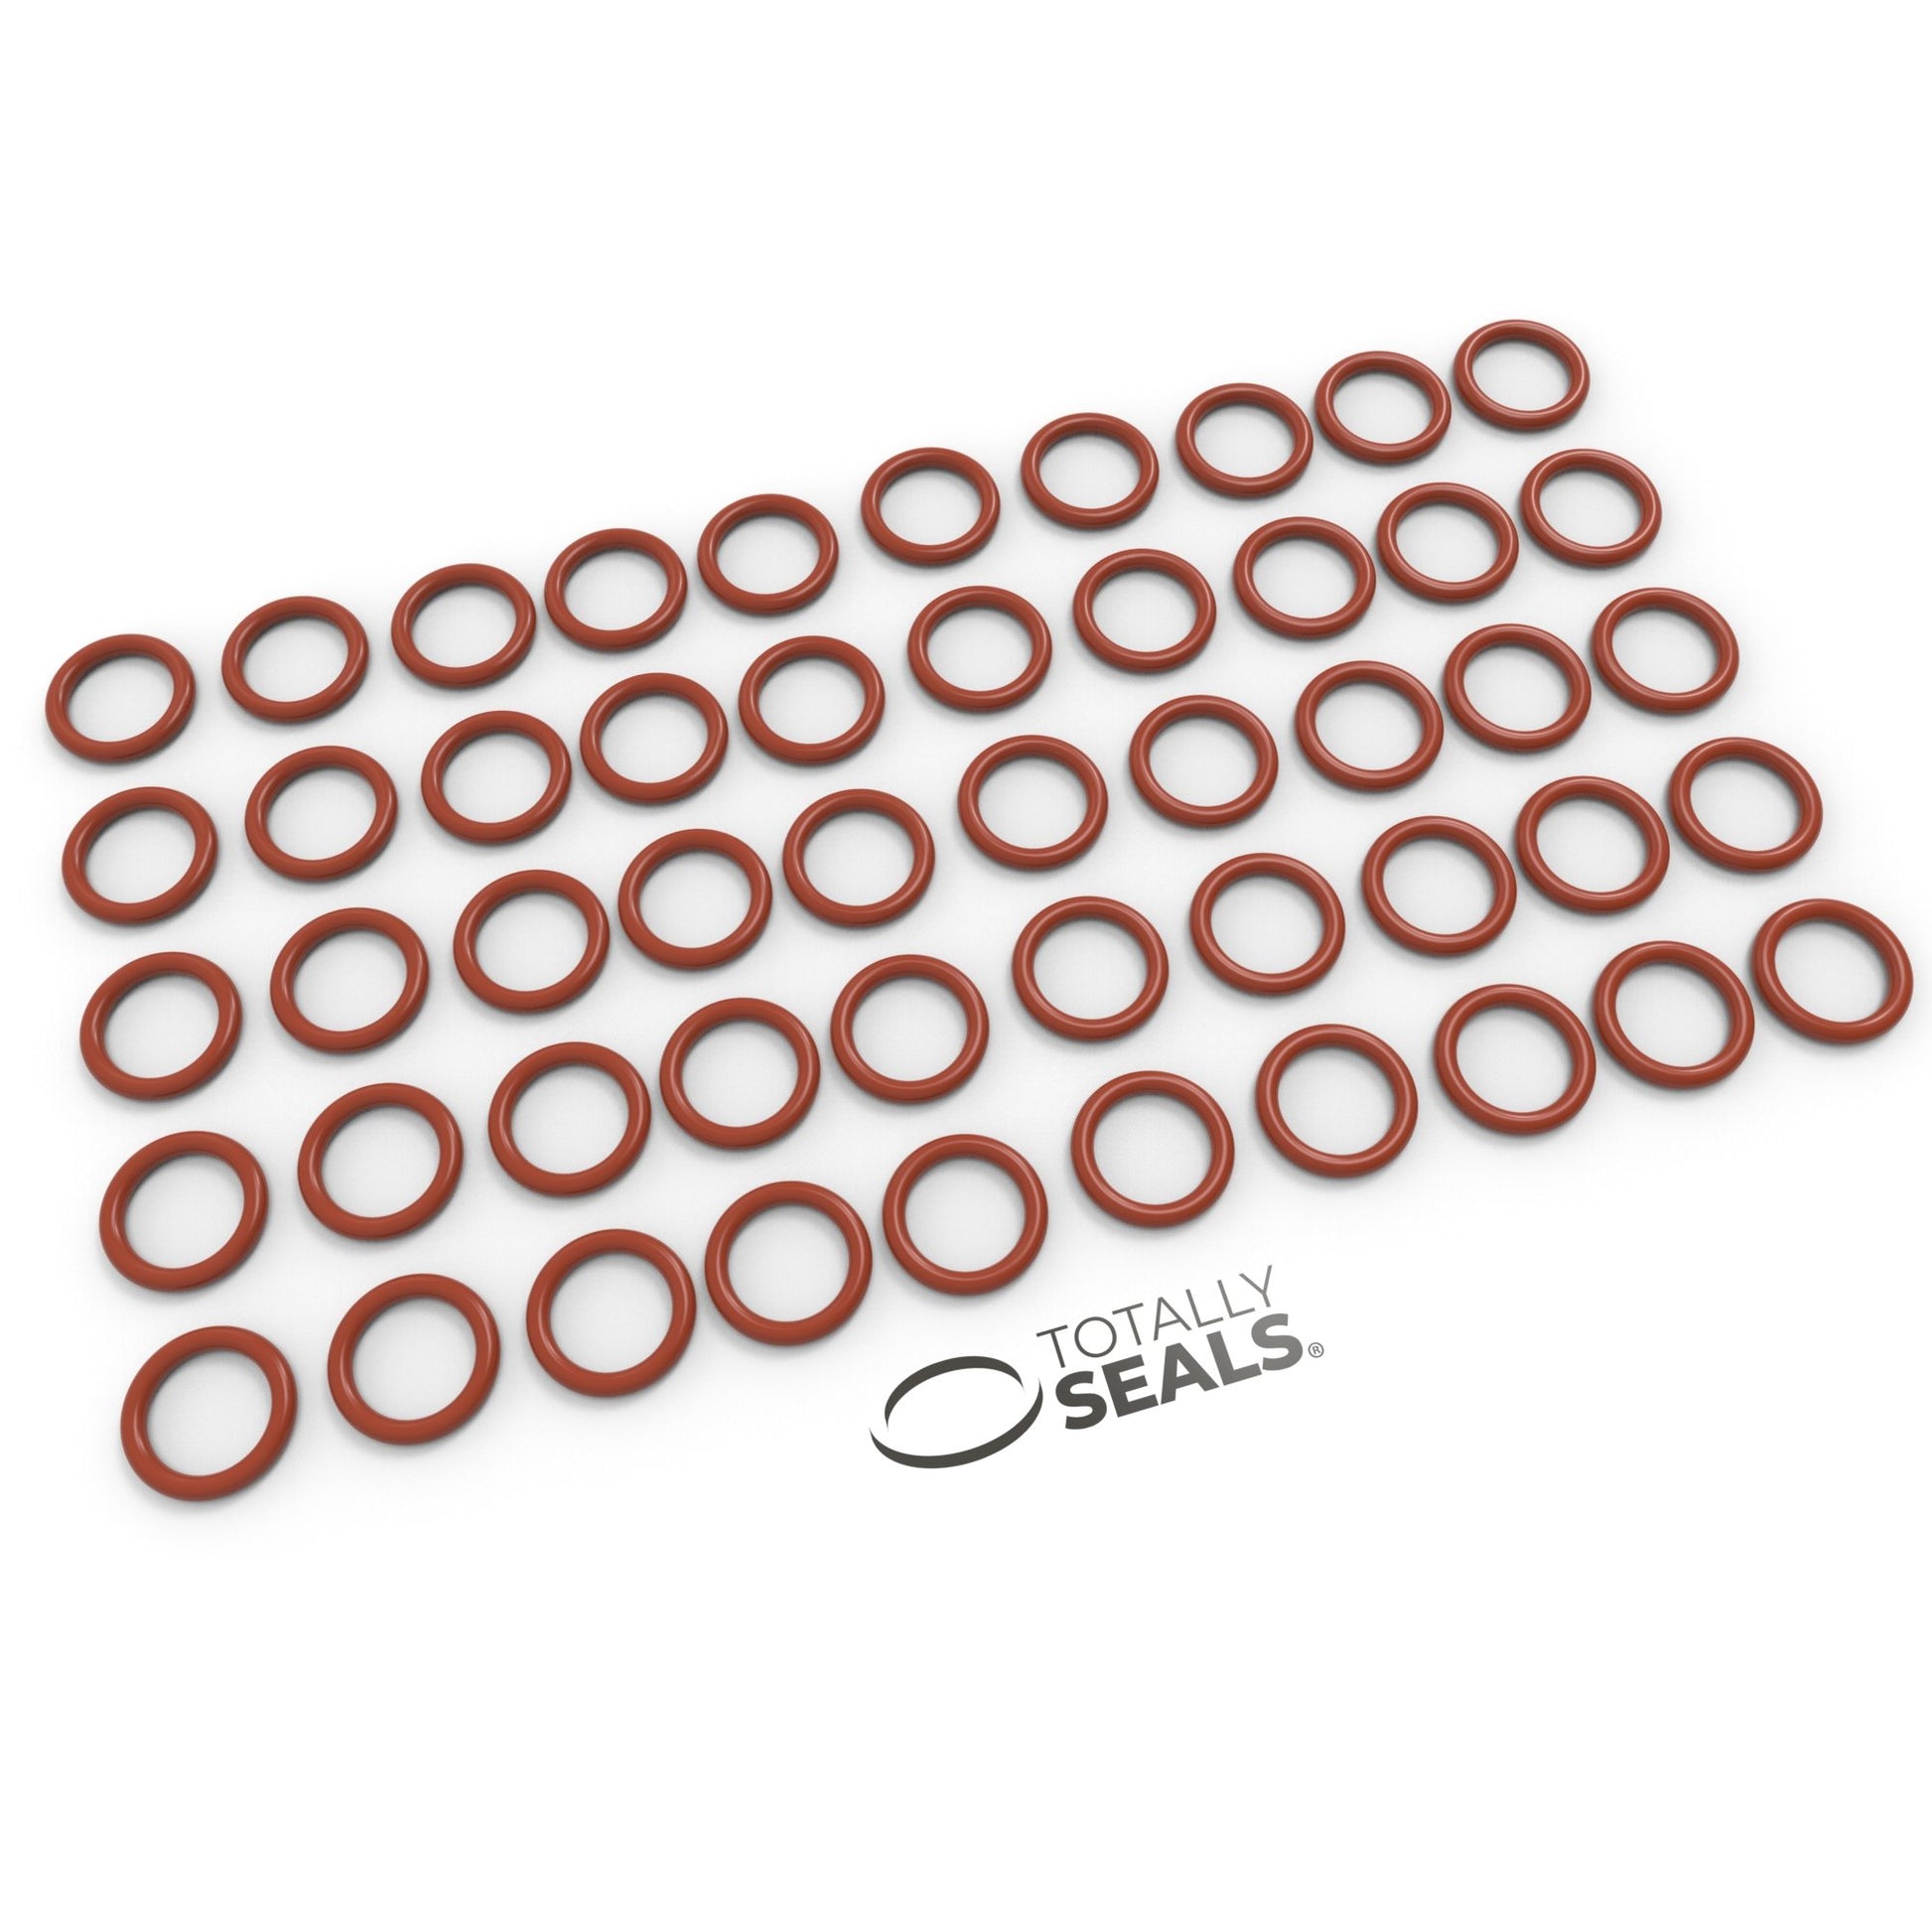 14mm x 3mm (20mm OD) Silicone O-Rings - Totally Seals®